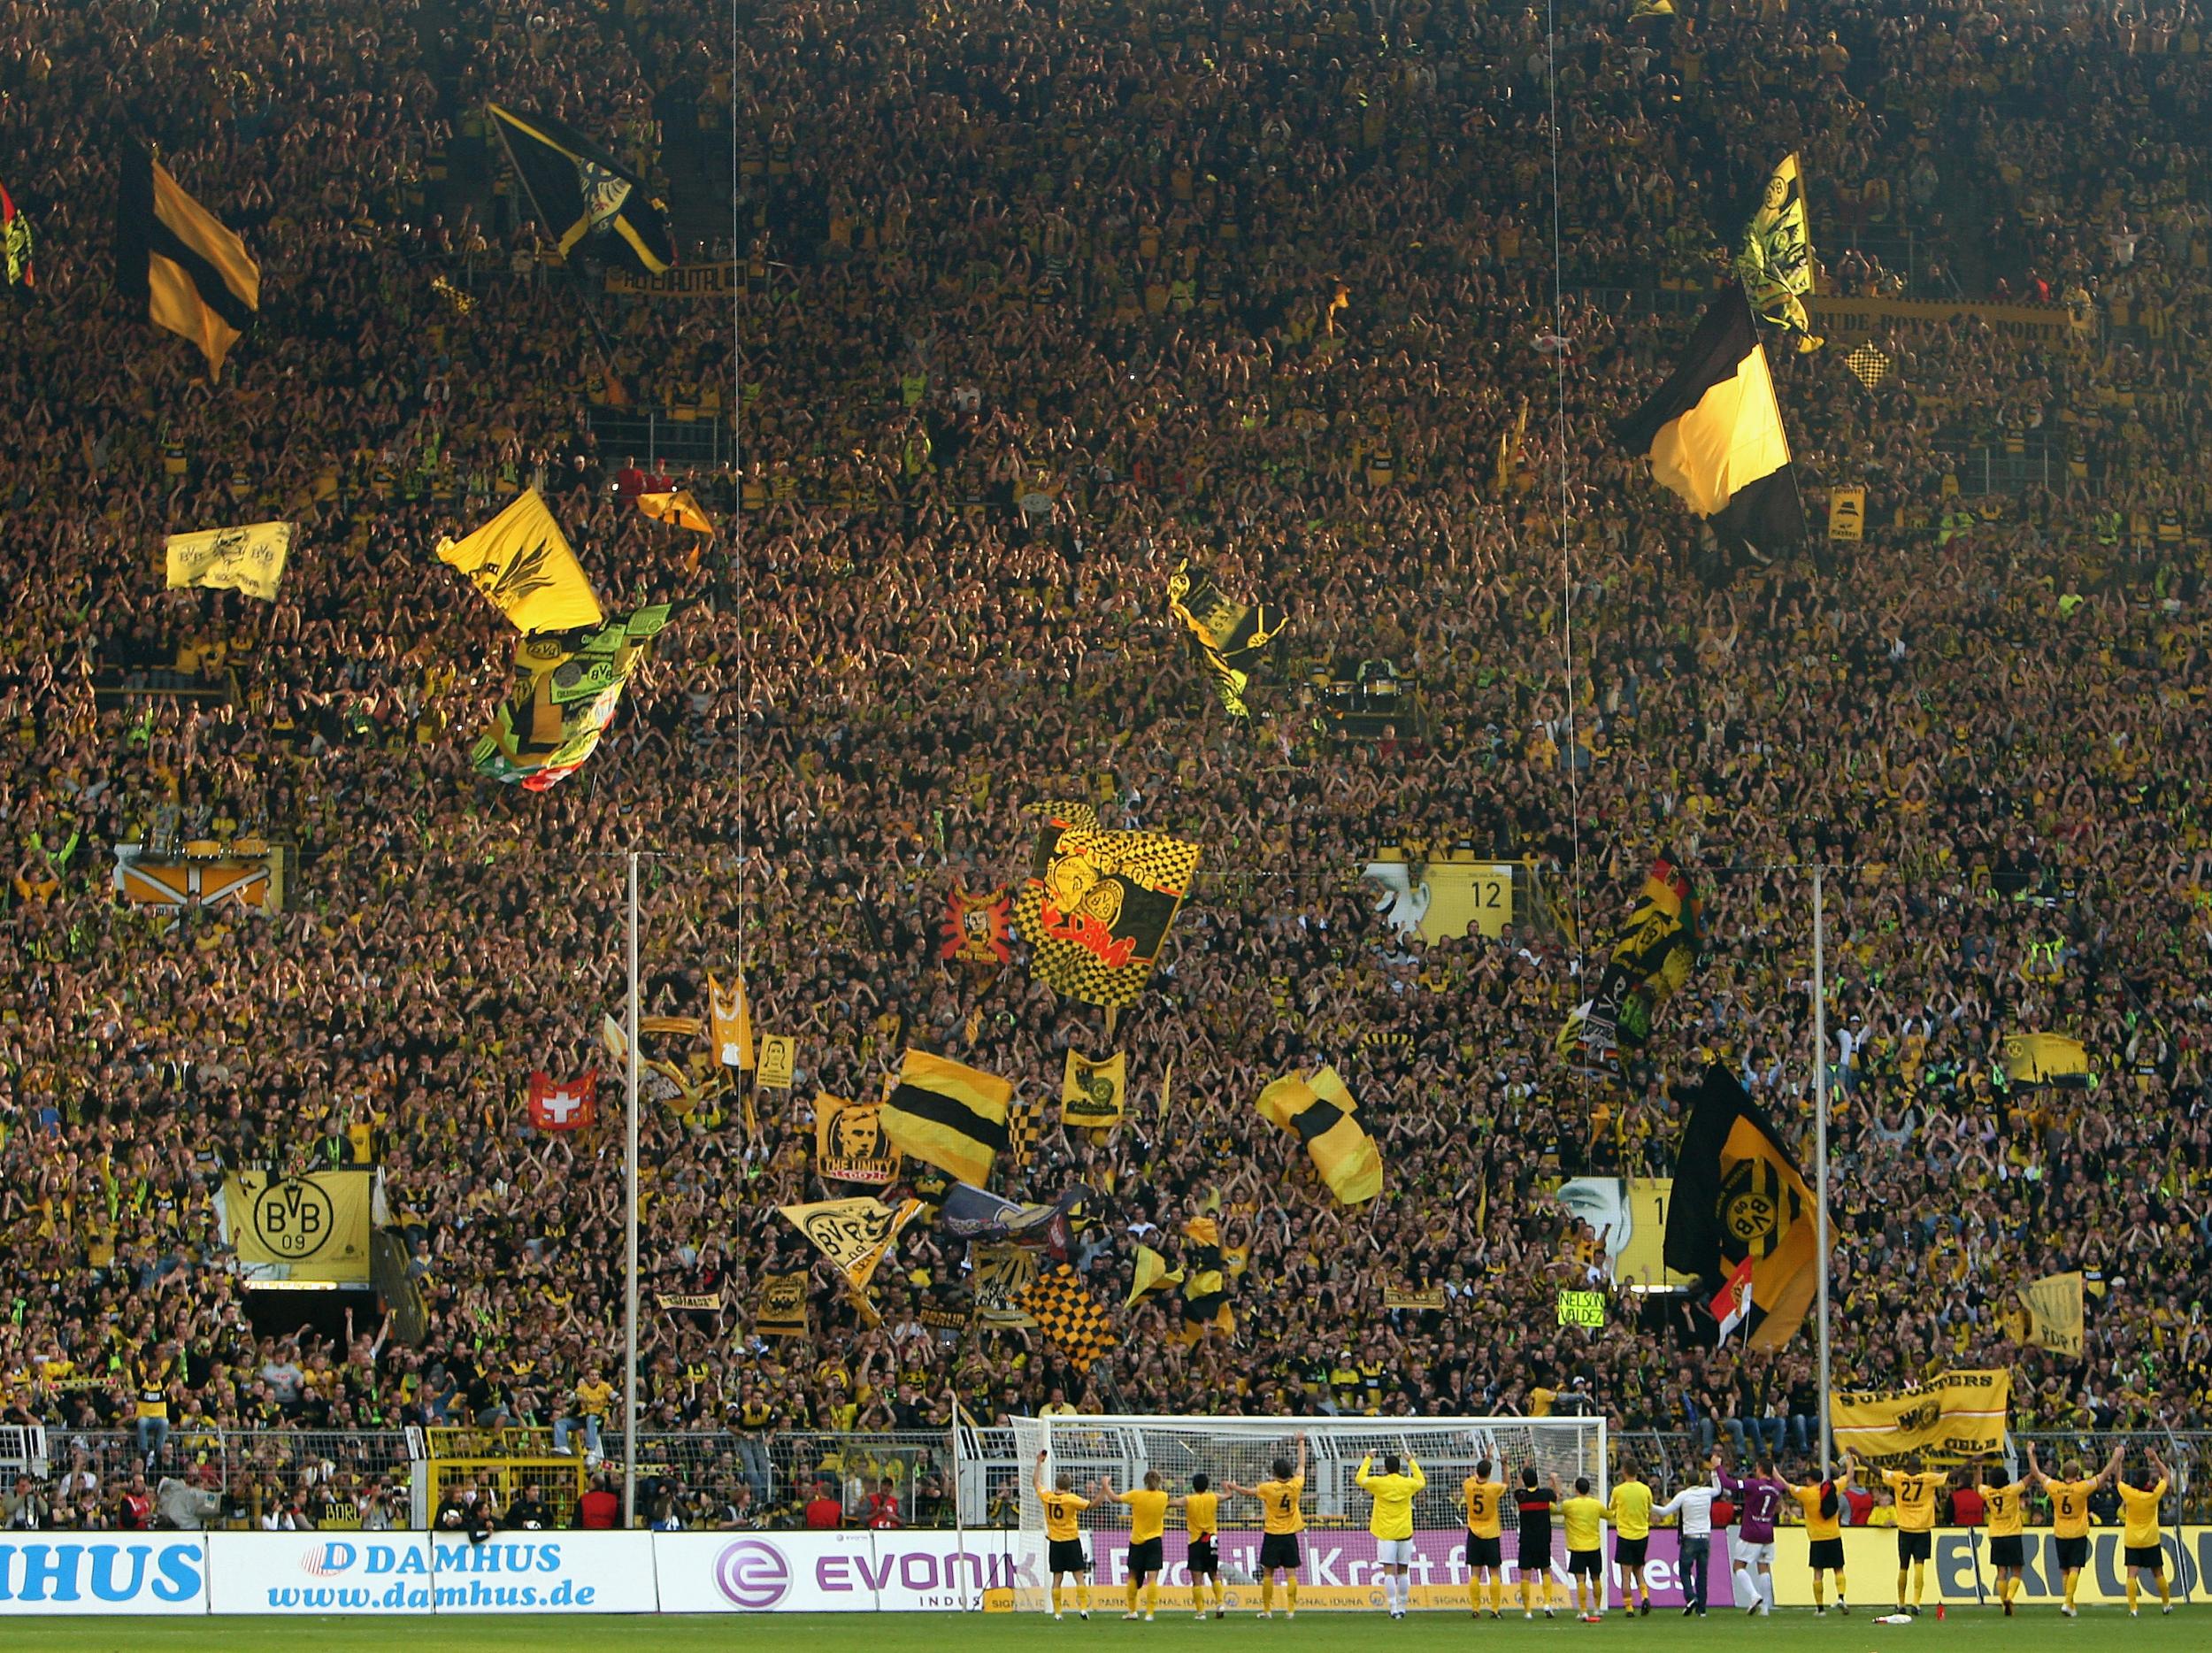 The Bundesliga is known for its passionate fans